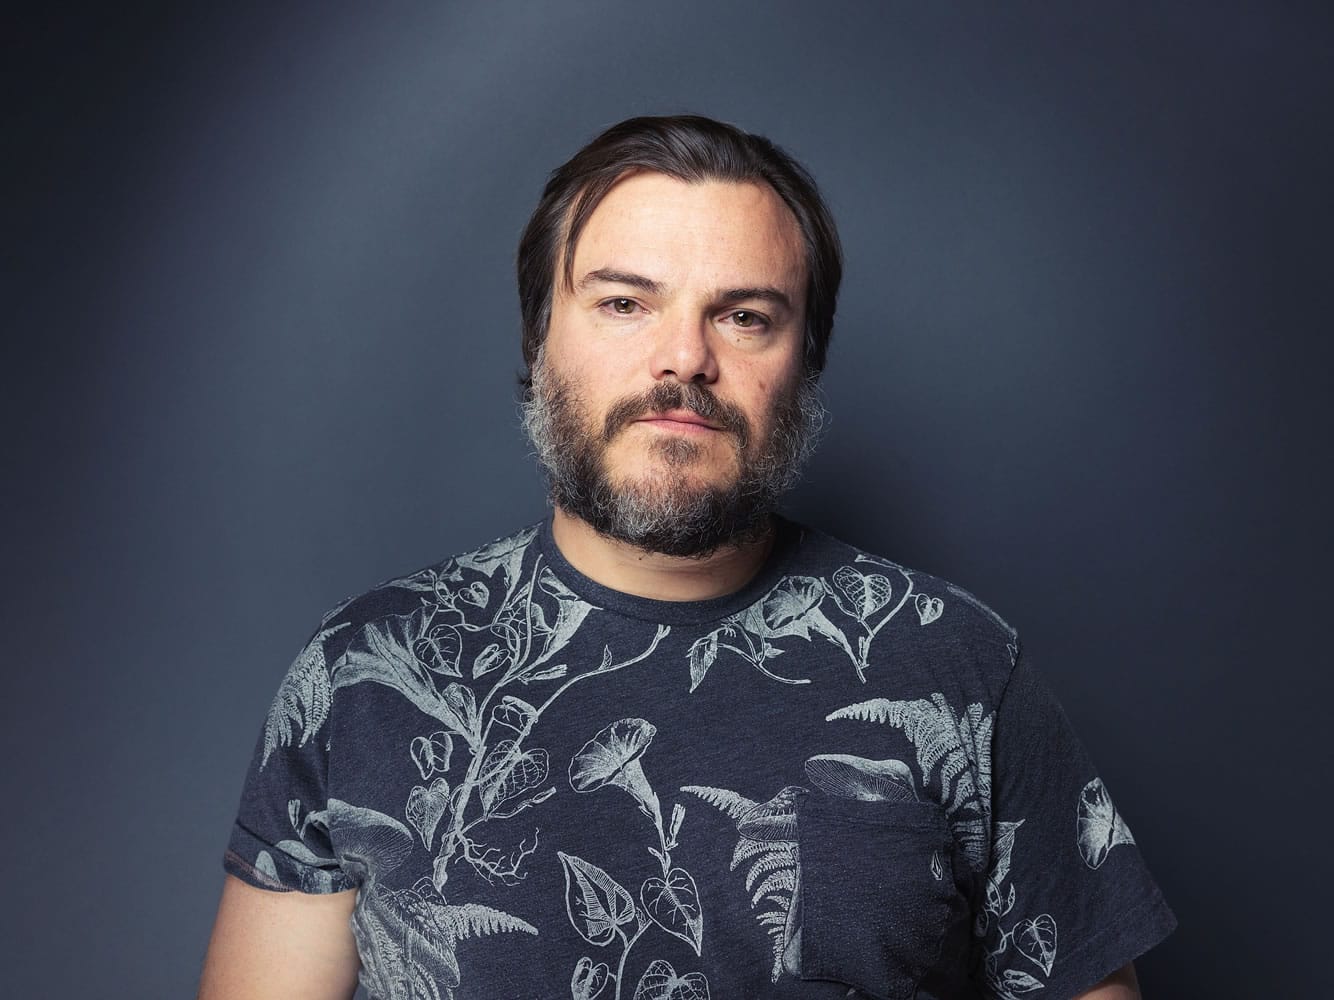 Jack Black stars as a high school loser who seeks his &quot;man crush&quot; to make his class reunion cooler and score points with former classmates in &quot;The D Train.&quot;